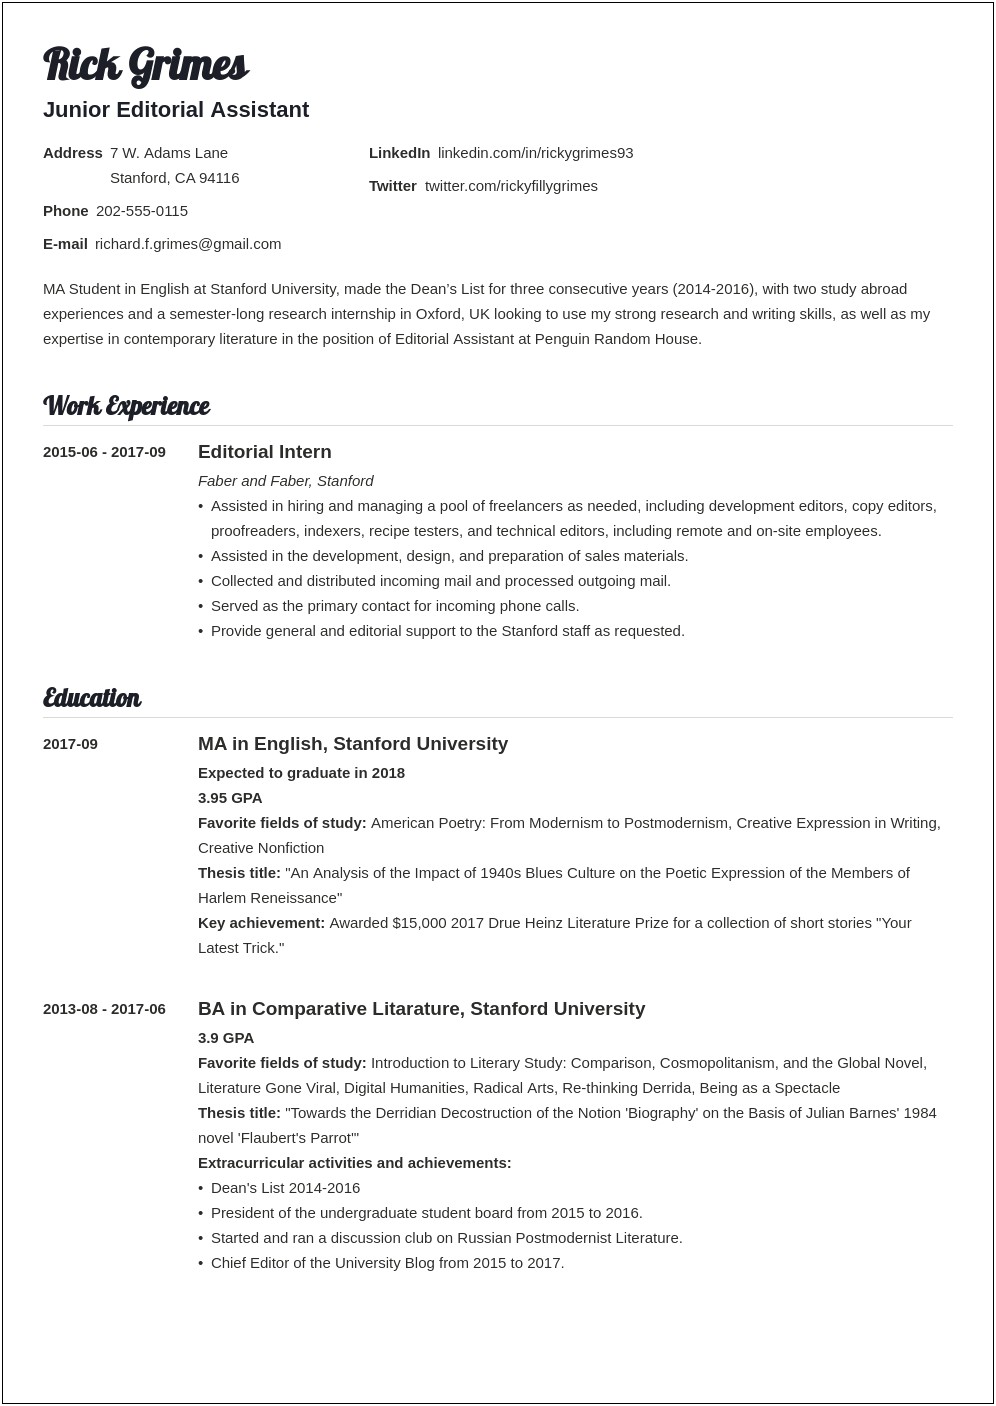 Resume Example With College Courses Listed